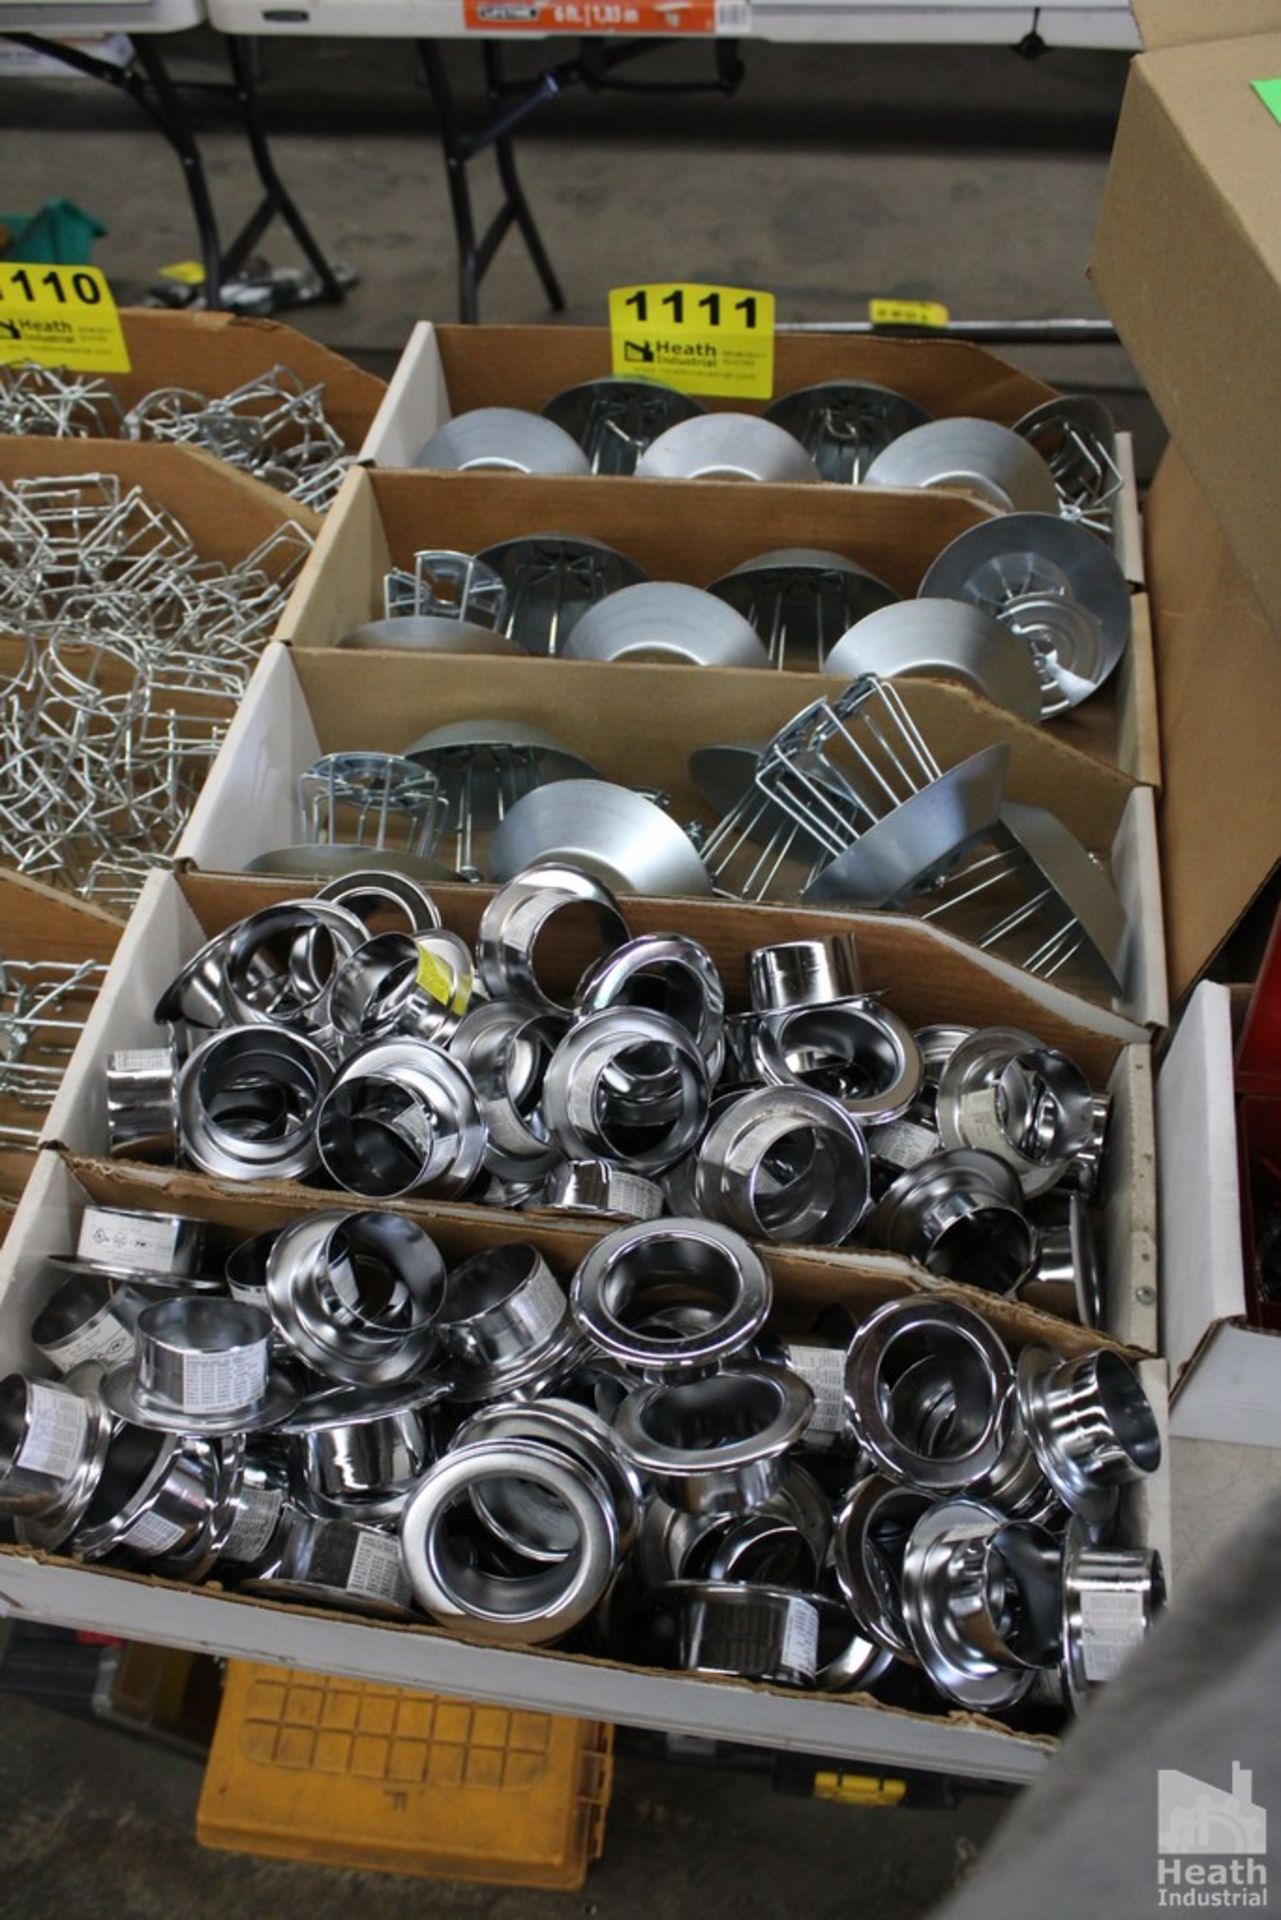 (5) BOXES OF ASSORTED SPRINKLER HEAD CAGES AND END CAPS